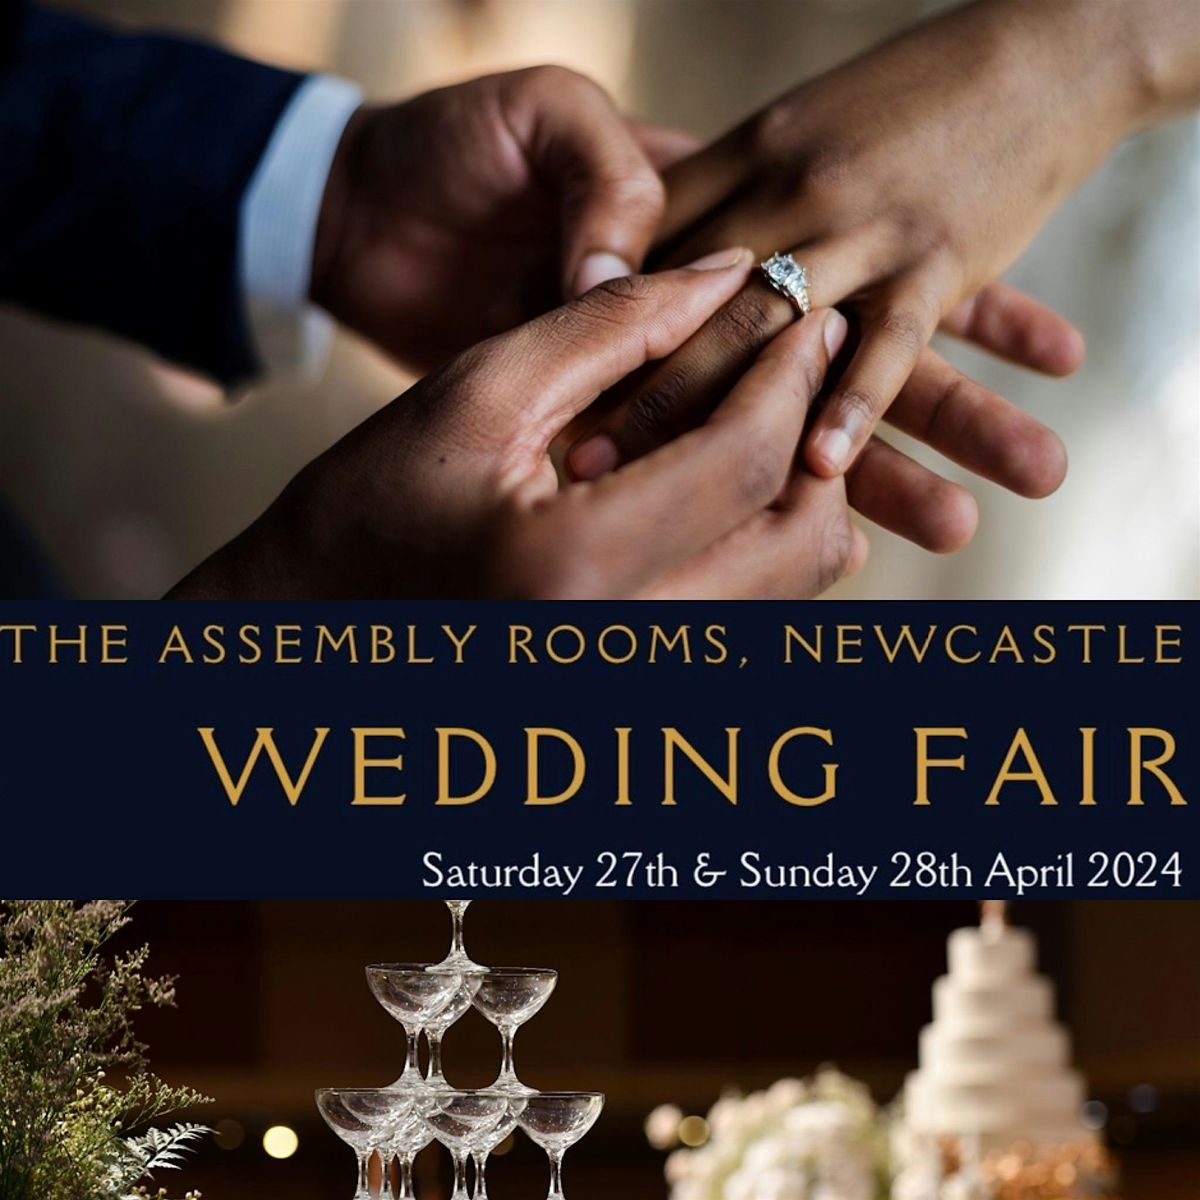 The Assembly Rooms Wedding Fair